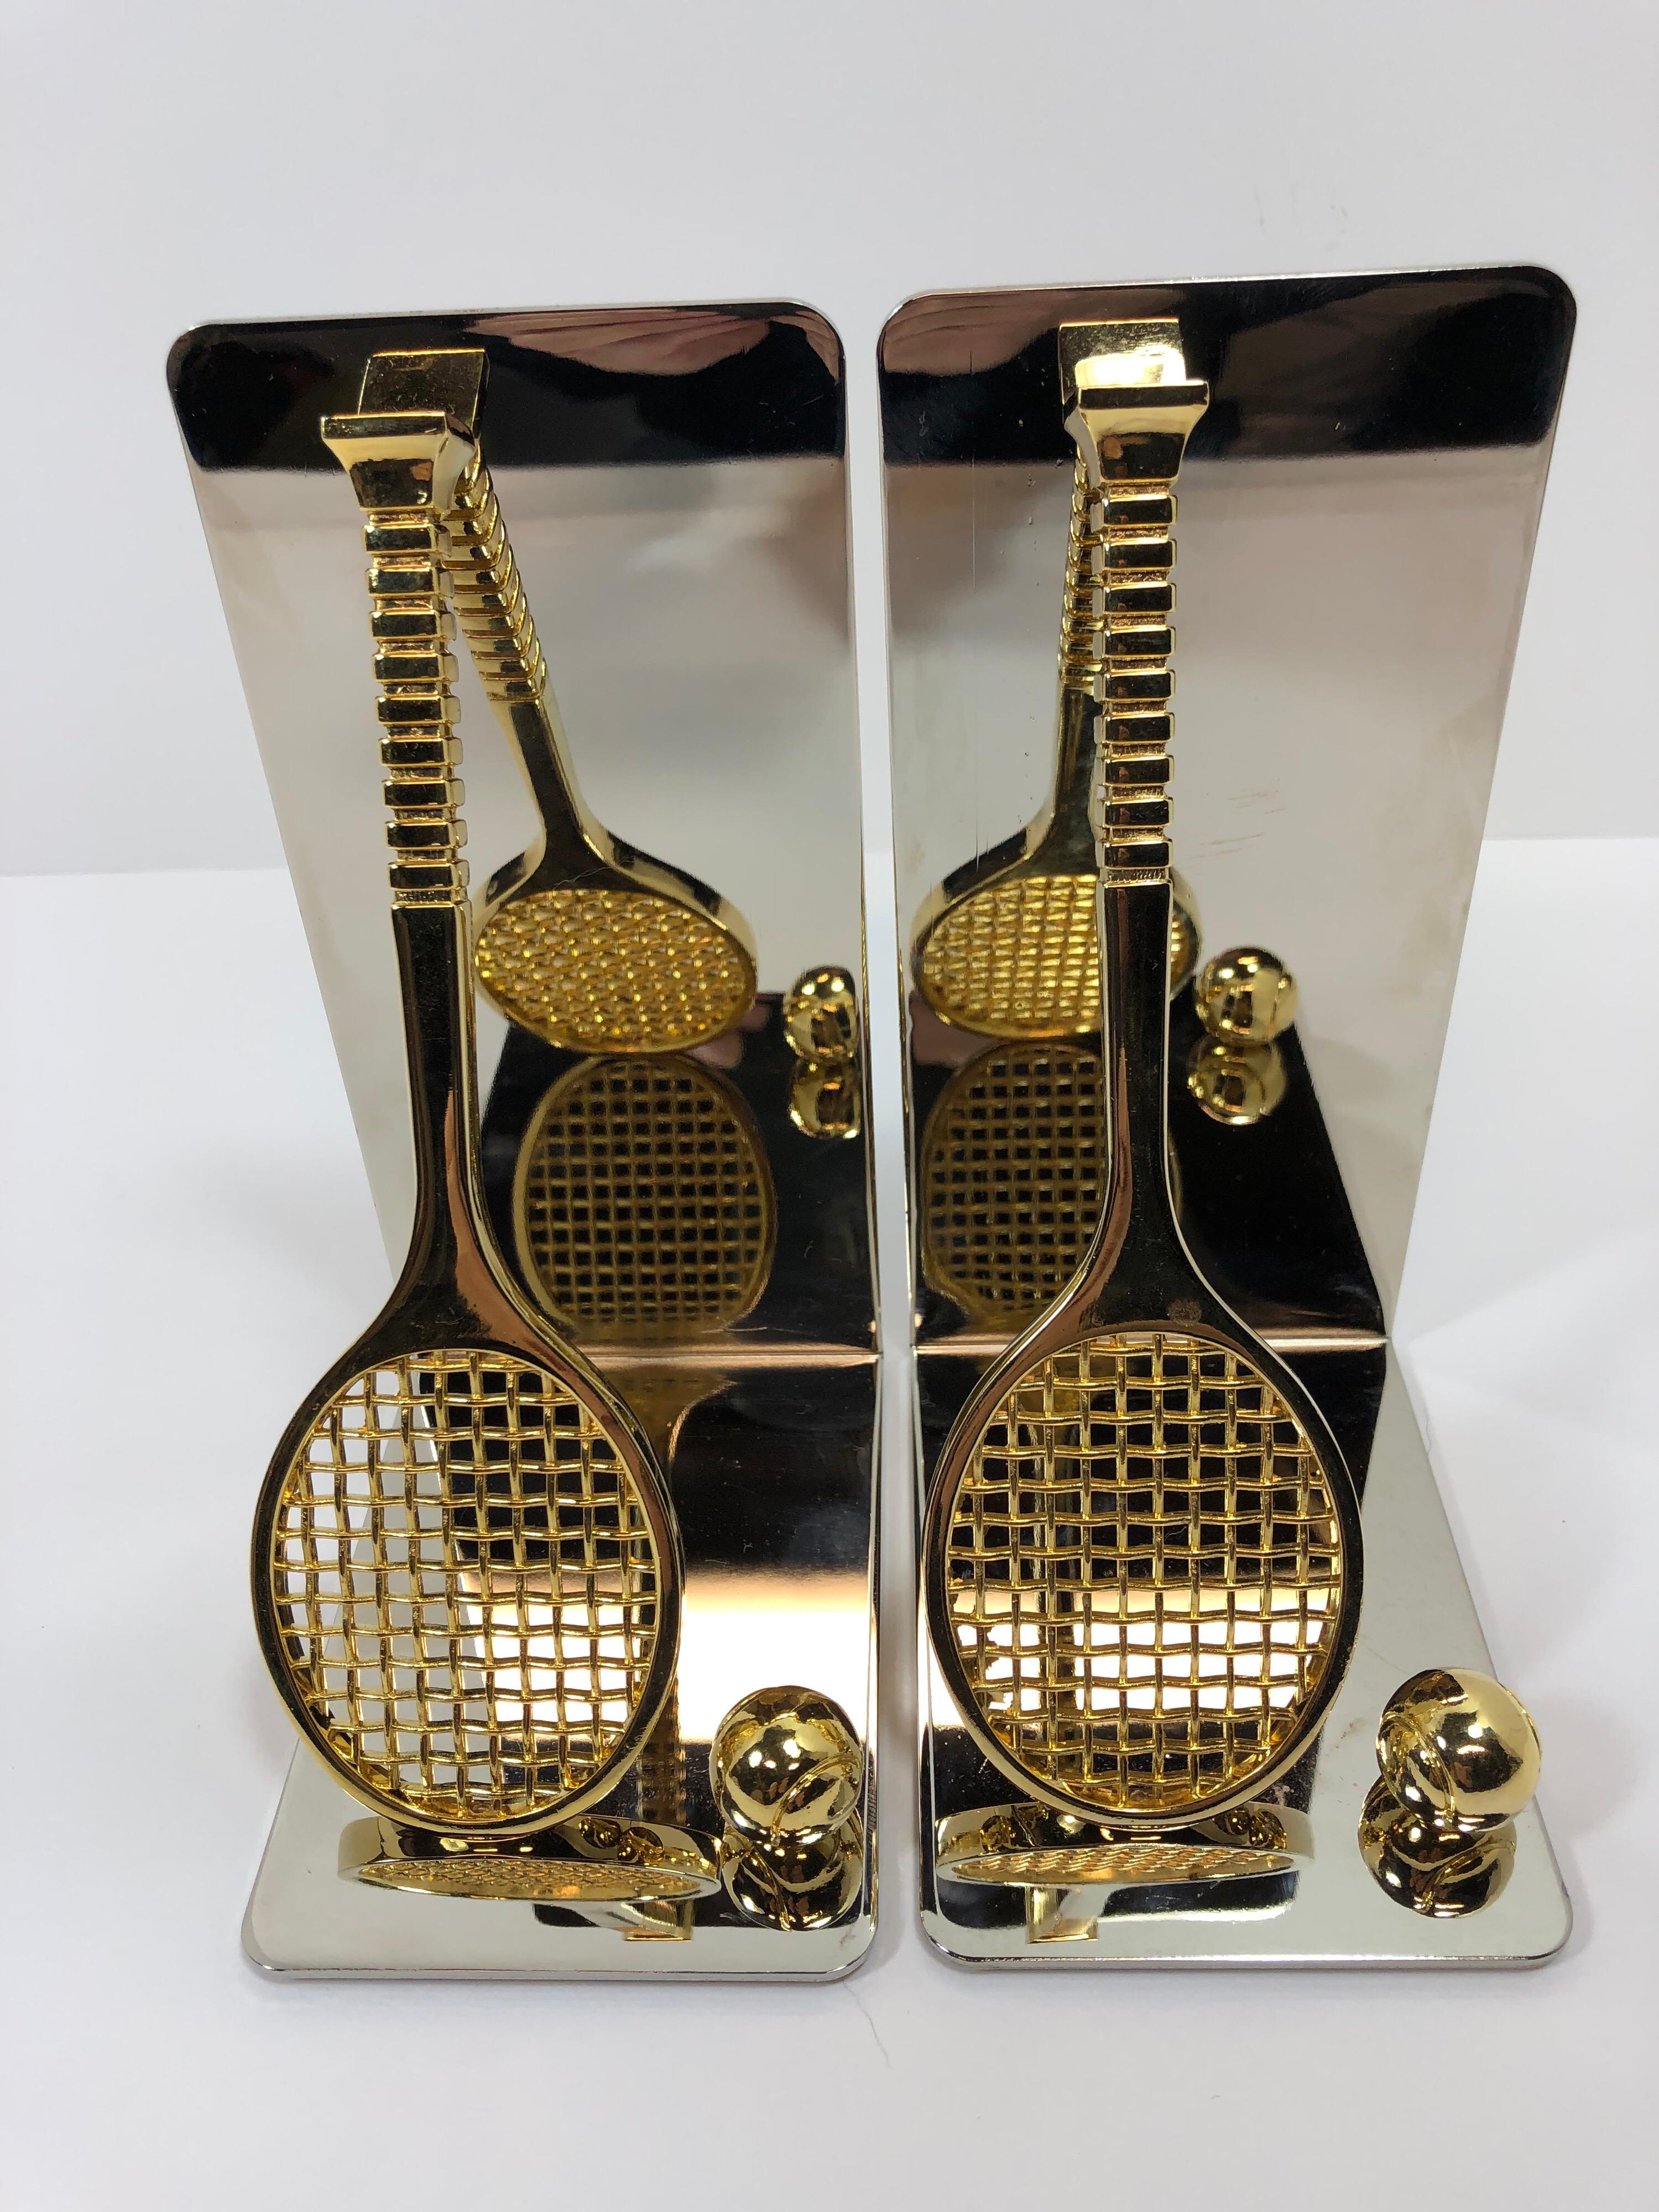 Set of brass and chrome tennis racket bookends. Has thin foam on bottom to prevent scratching furniture. New old stock, never used.